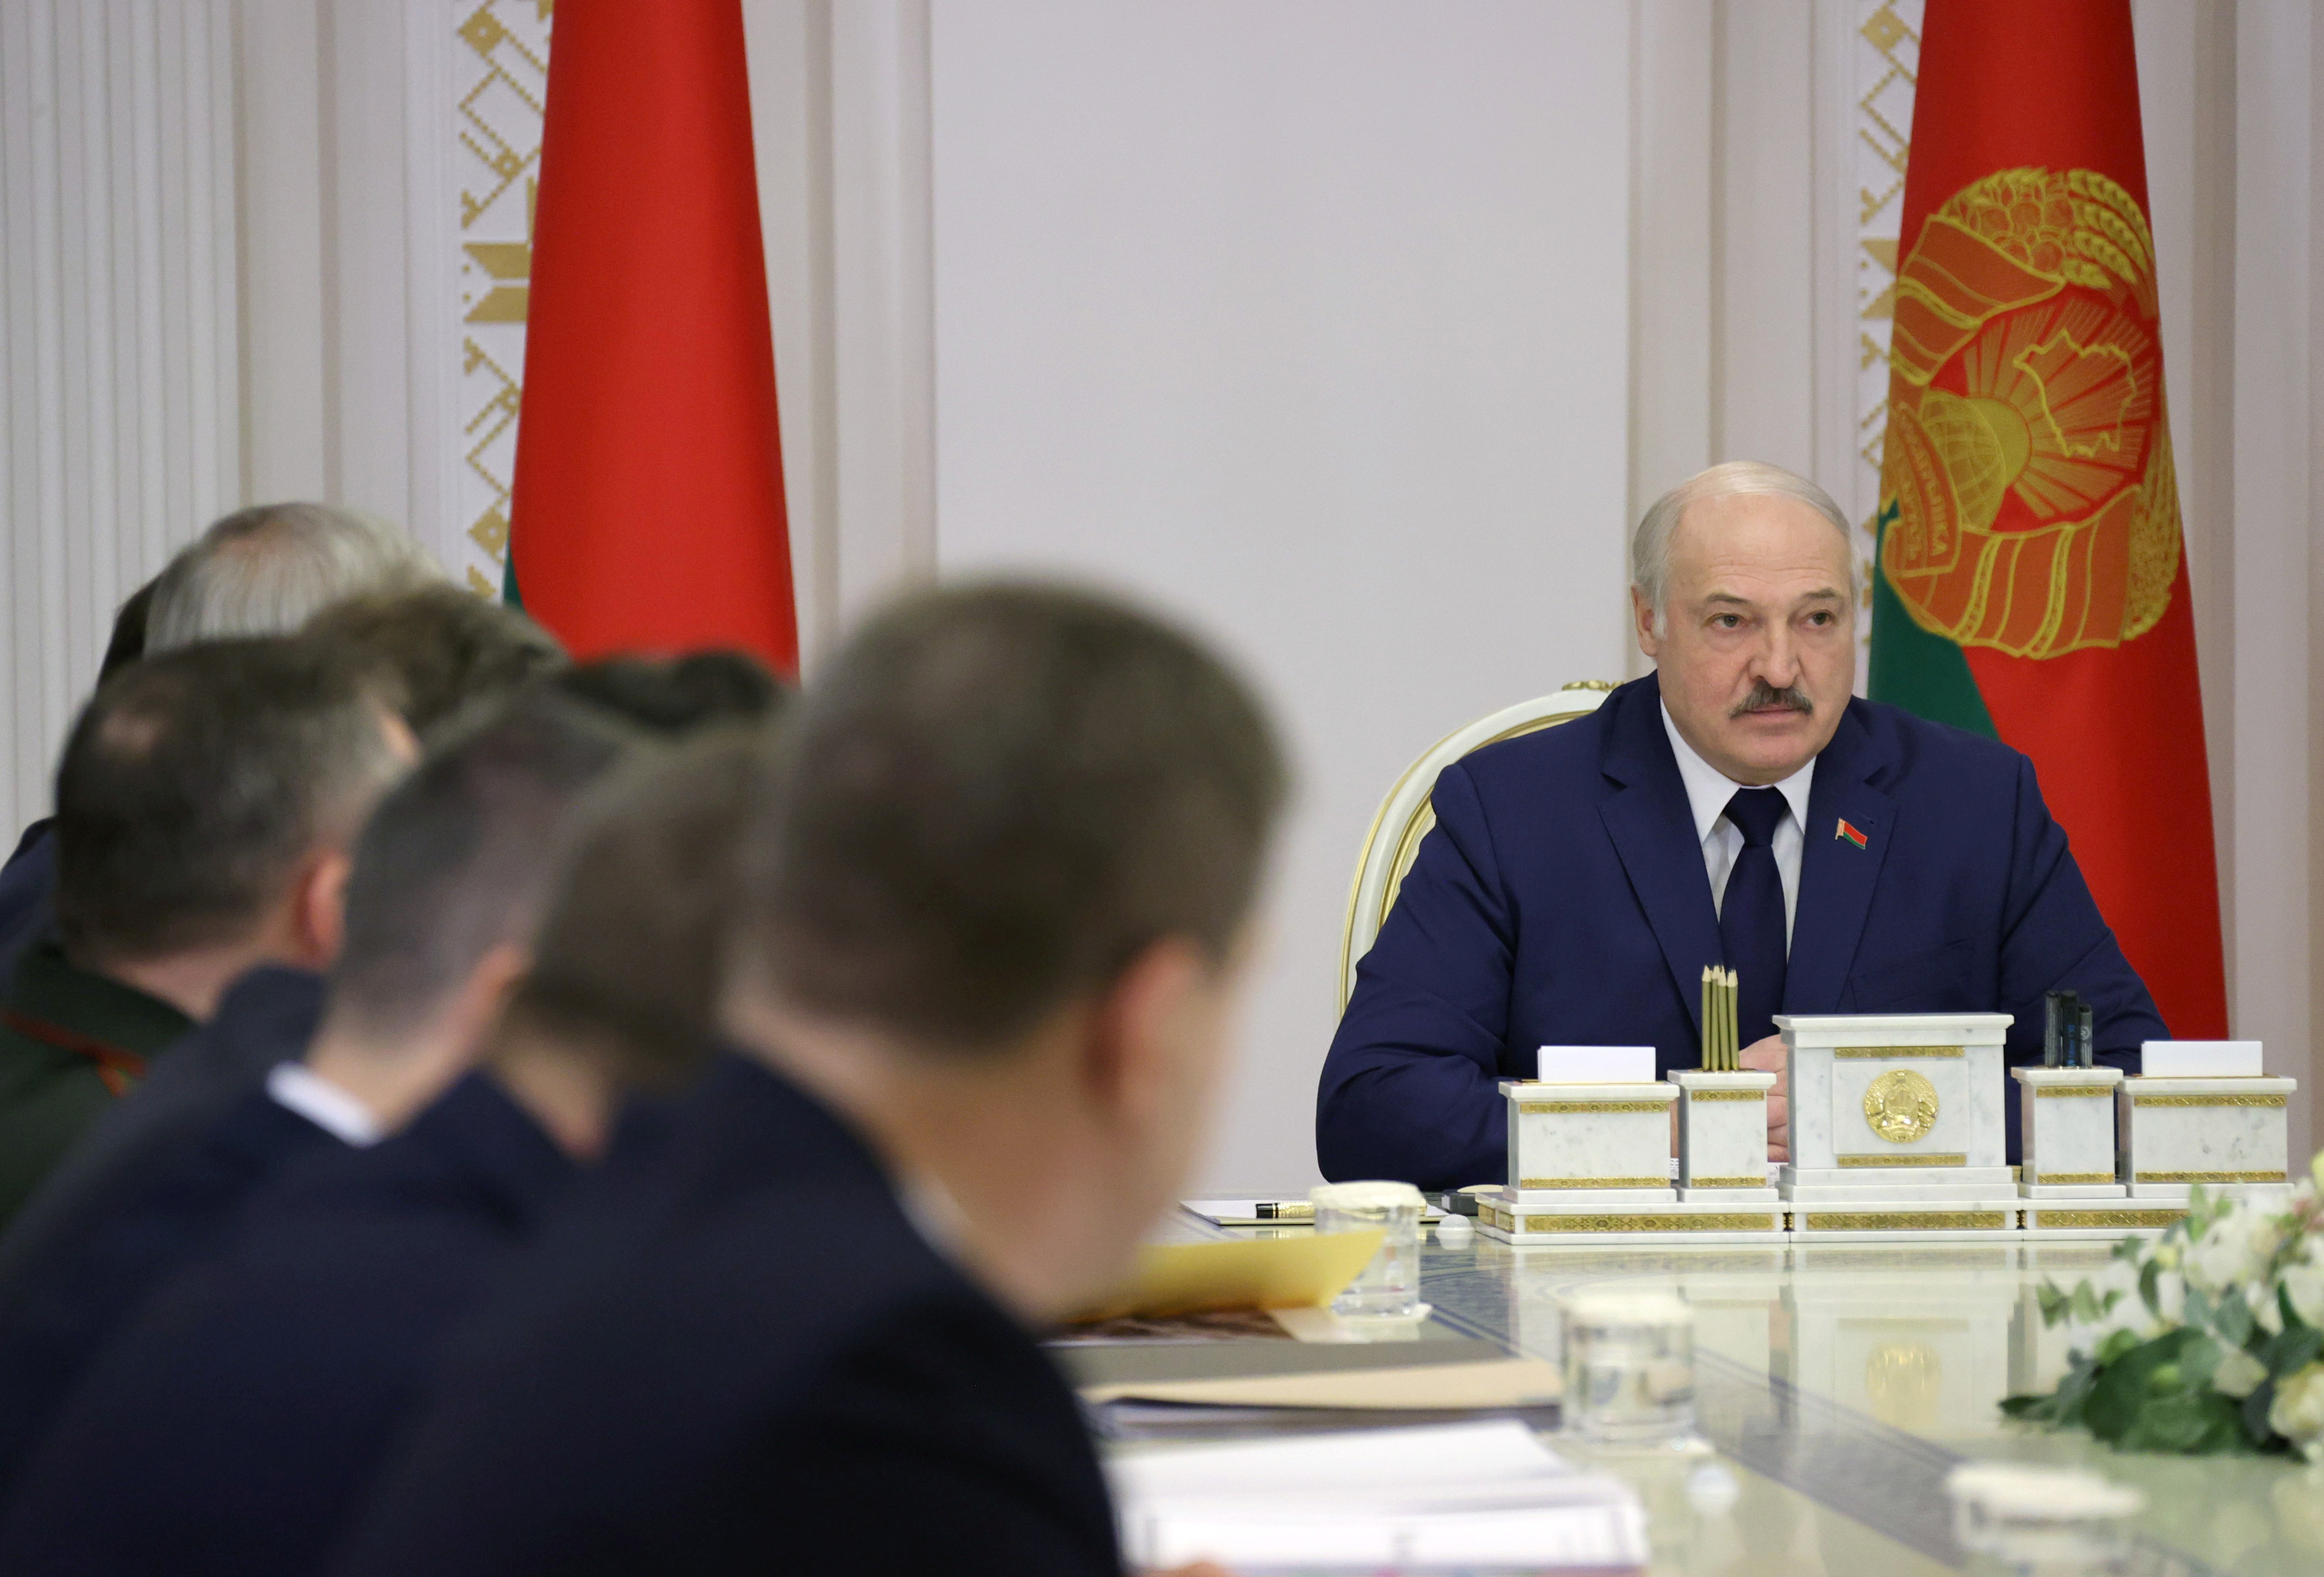 Belarusian President Alexander Lukashenko chairs a meeting with the leadership of the Council of Ministers in Minsk, Belarus November 11, 2021. Nikolai Petrov/BelTA/Handout via REUTERS 